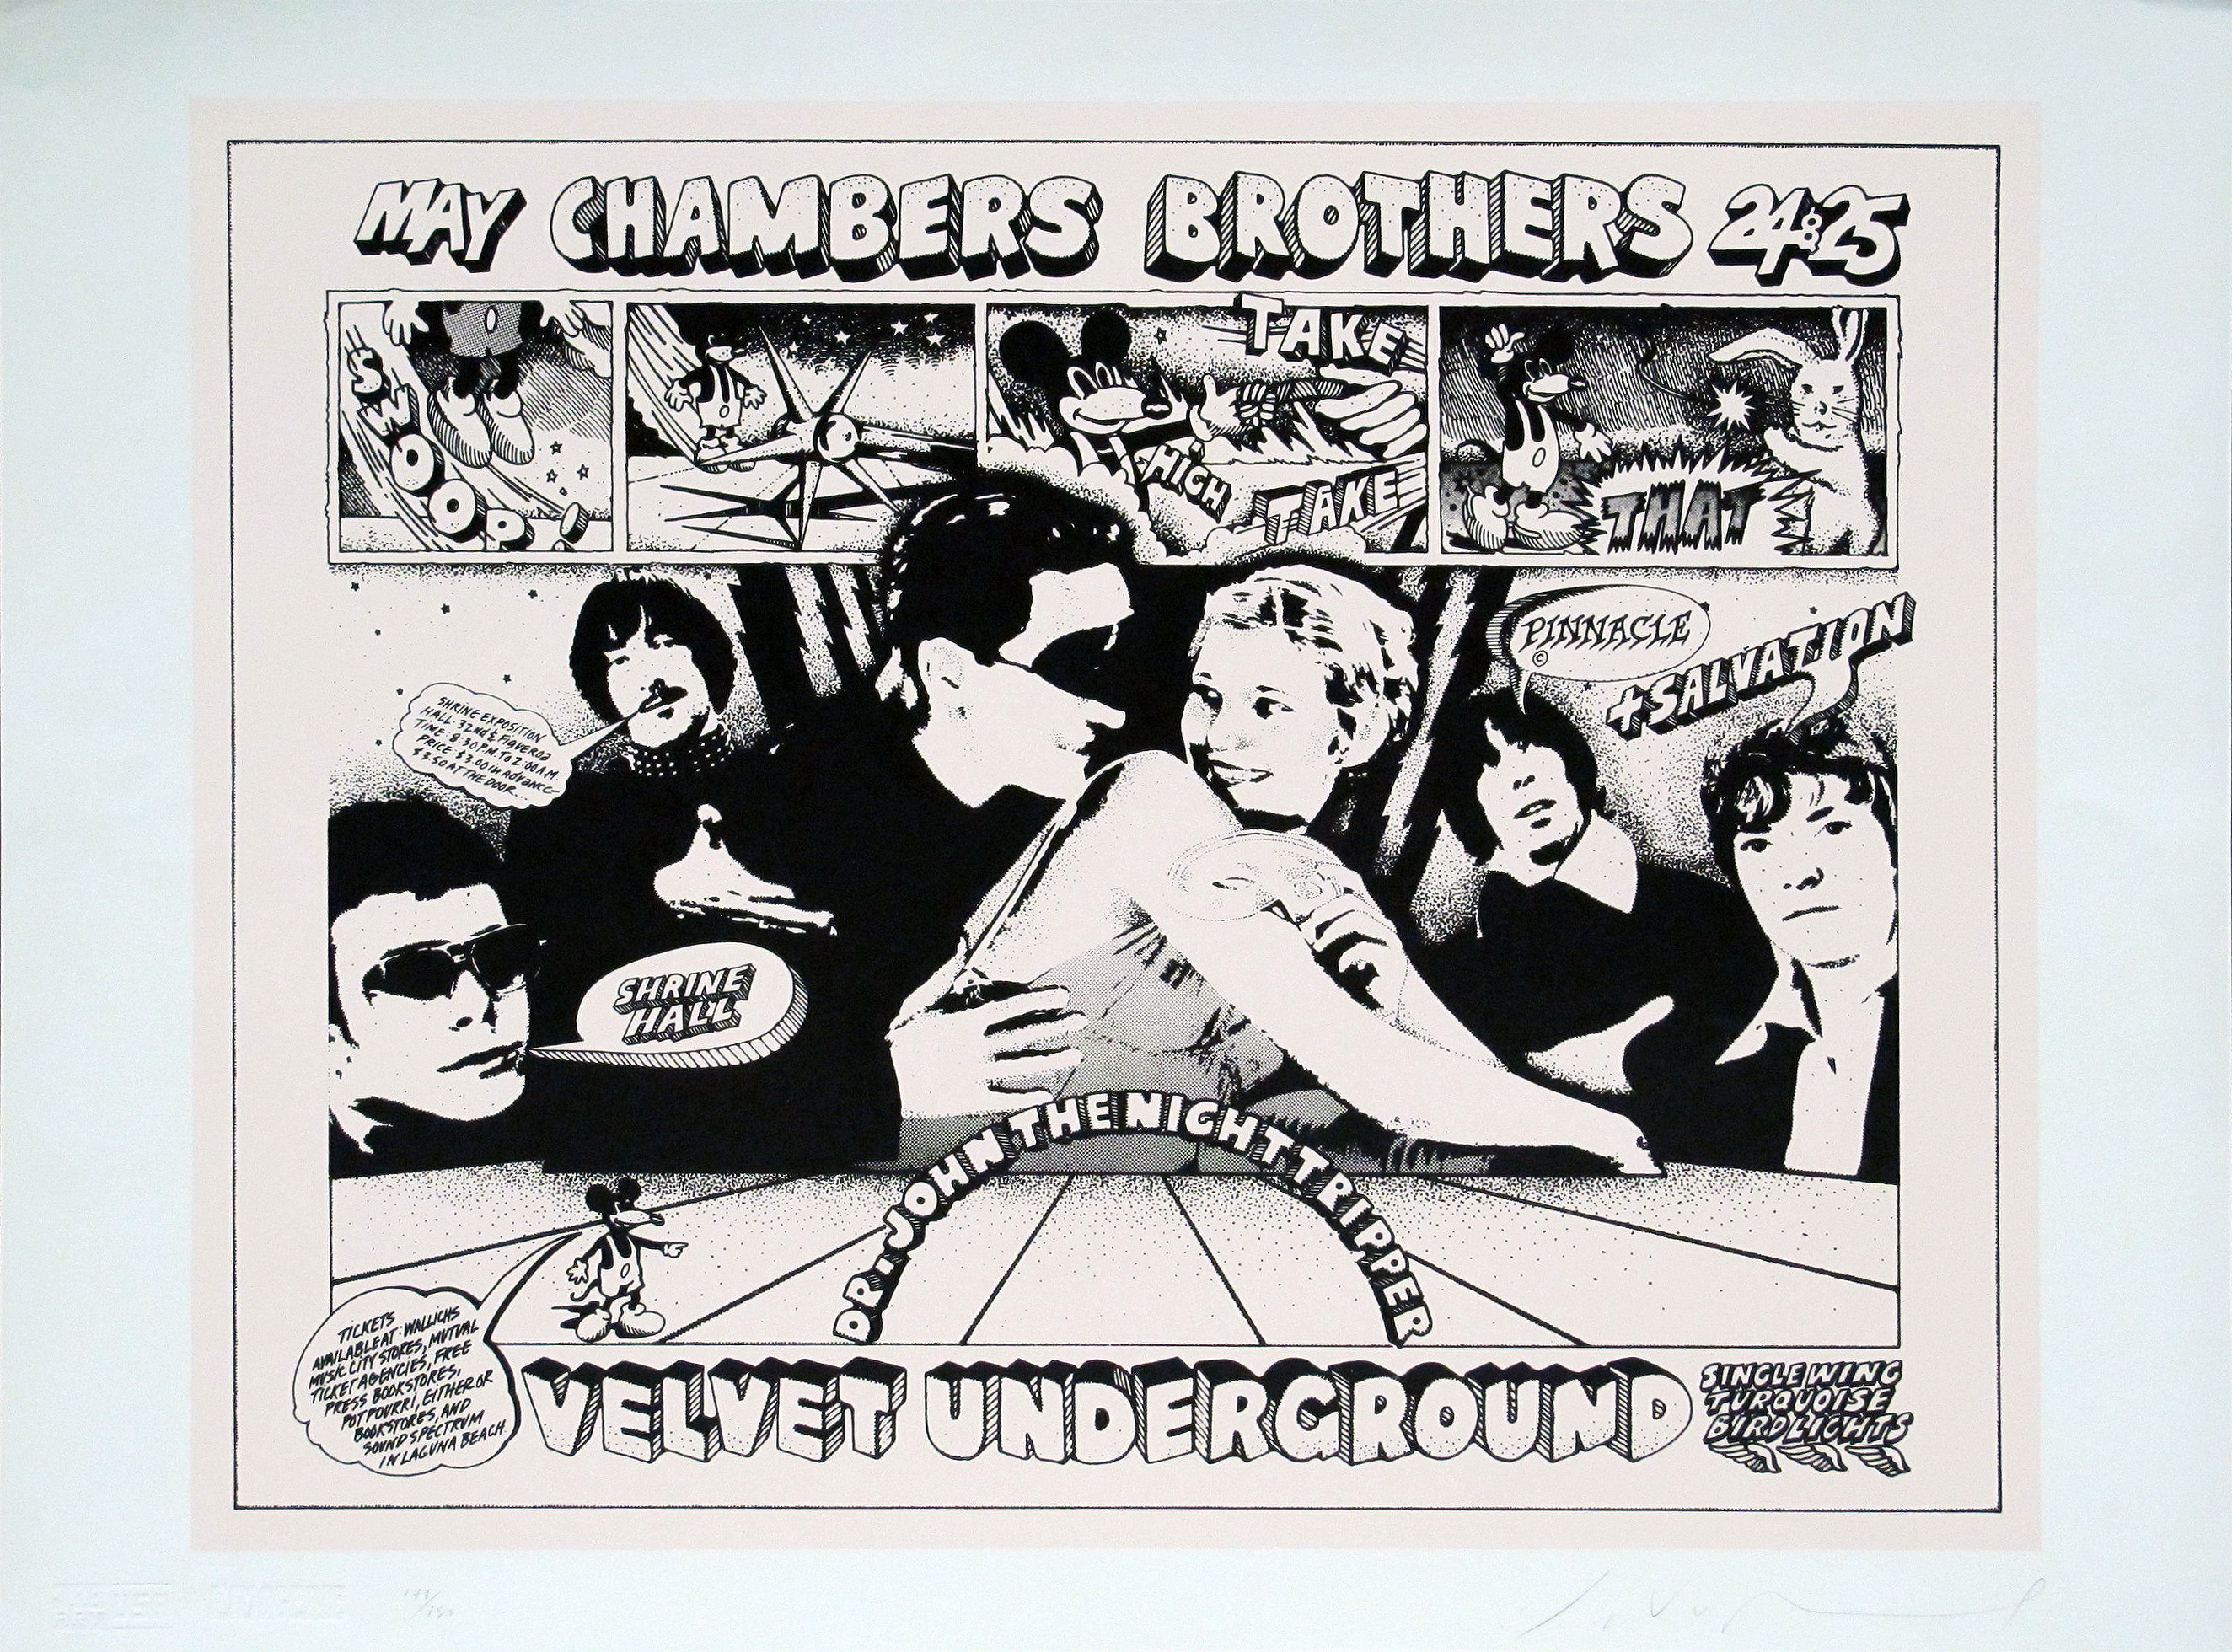 Chambers Brothers and the Velvet Underground